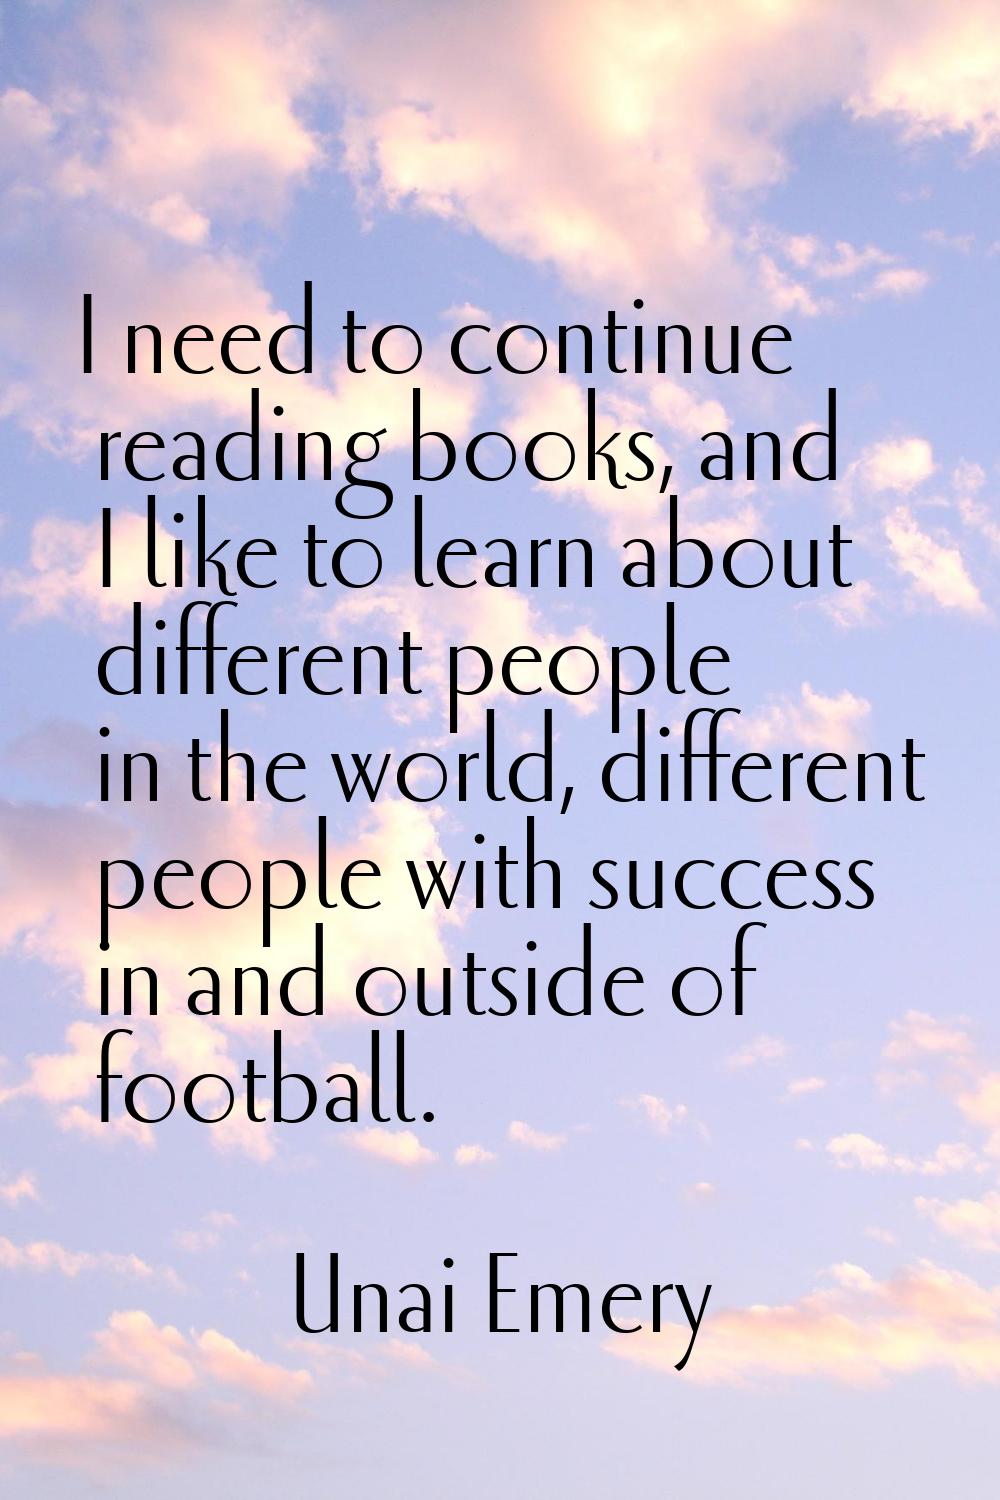 I need to continue reading books, and I like to learn about different people in the world, differen